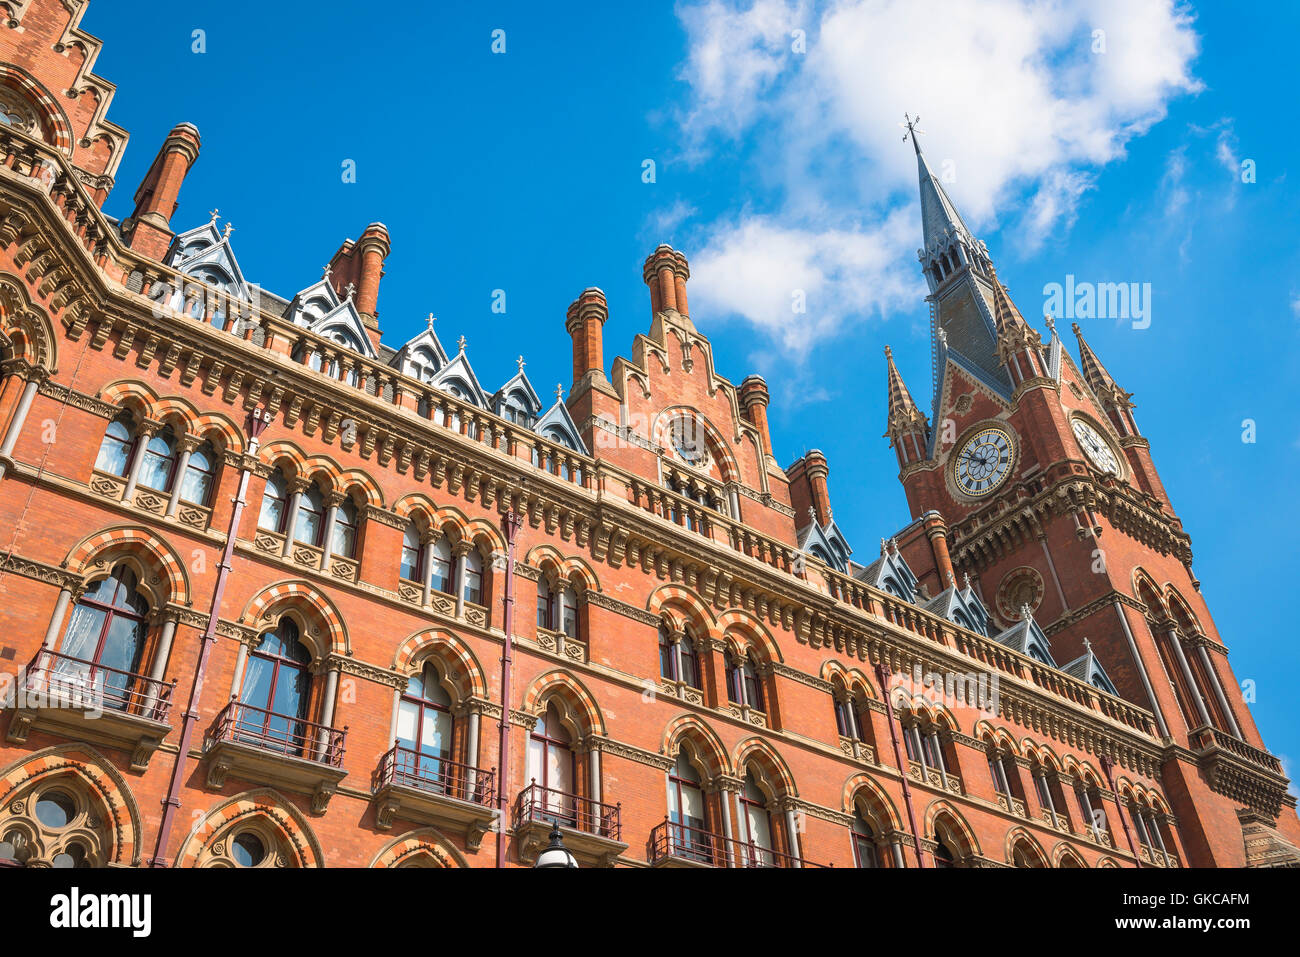 St Pancras Hotel London, the Victorian Gothic Revival style St Pancras Hotel at King's Cross, London, UK. Stock Photo